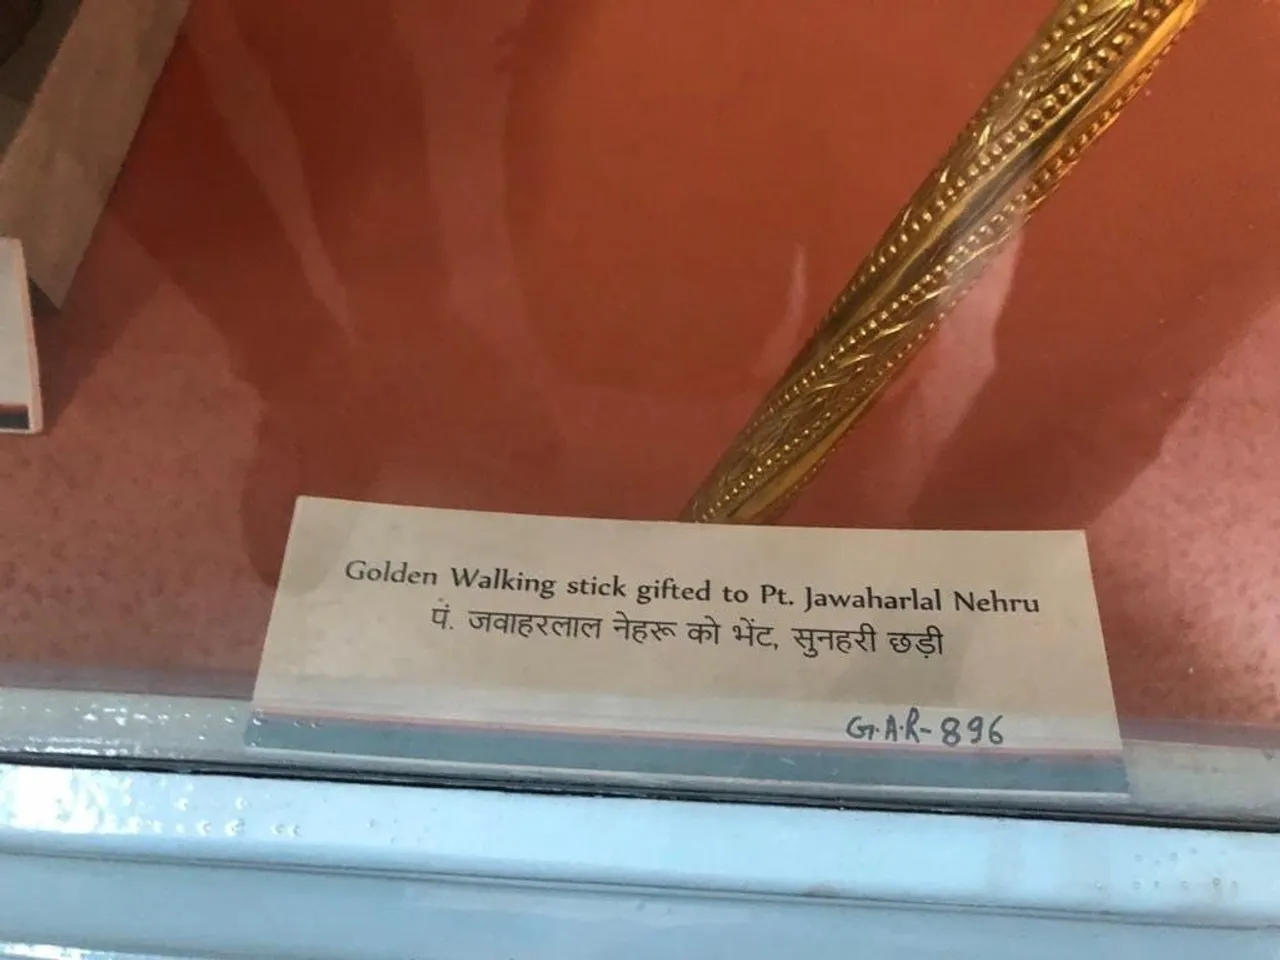 Cong tucked away sacred 'Sengol' in museum, called it 'golden stick gifted' to Nehru: BJP